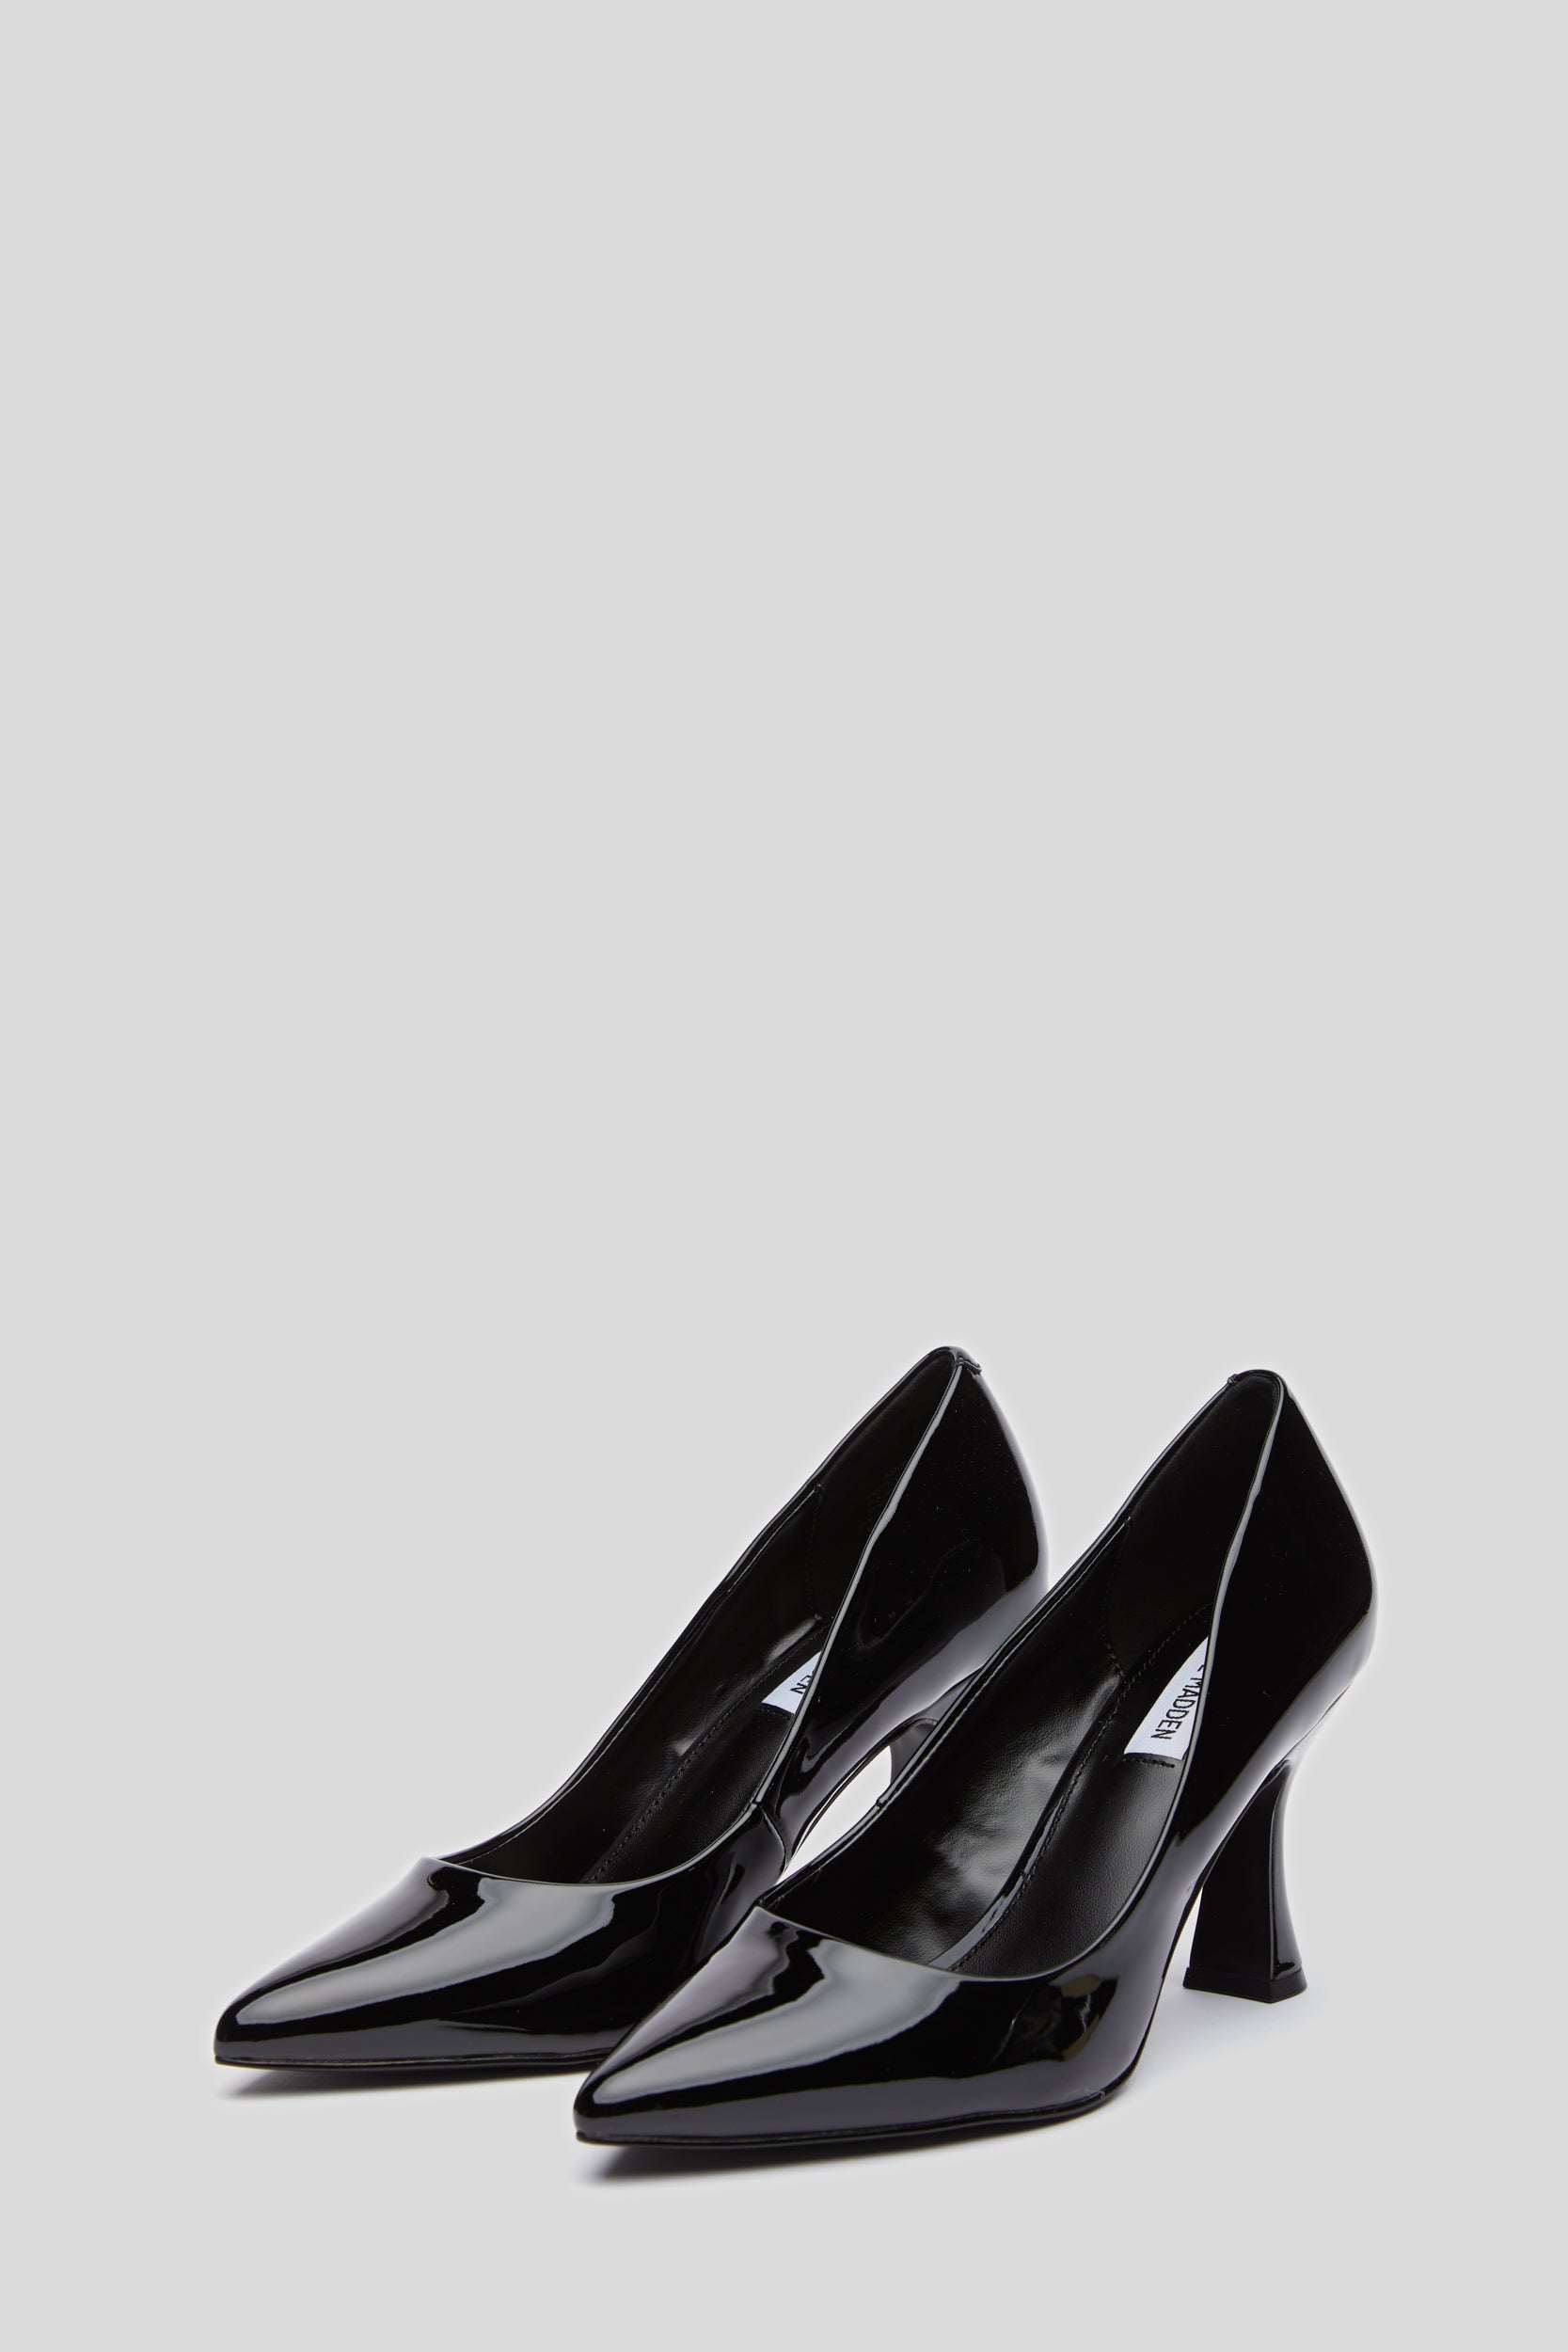 STEVE MADDEN "Notary" Pumps in Black Patent Leather